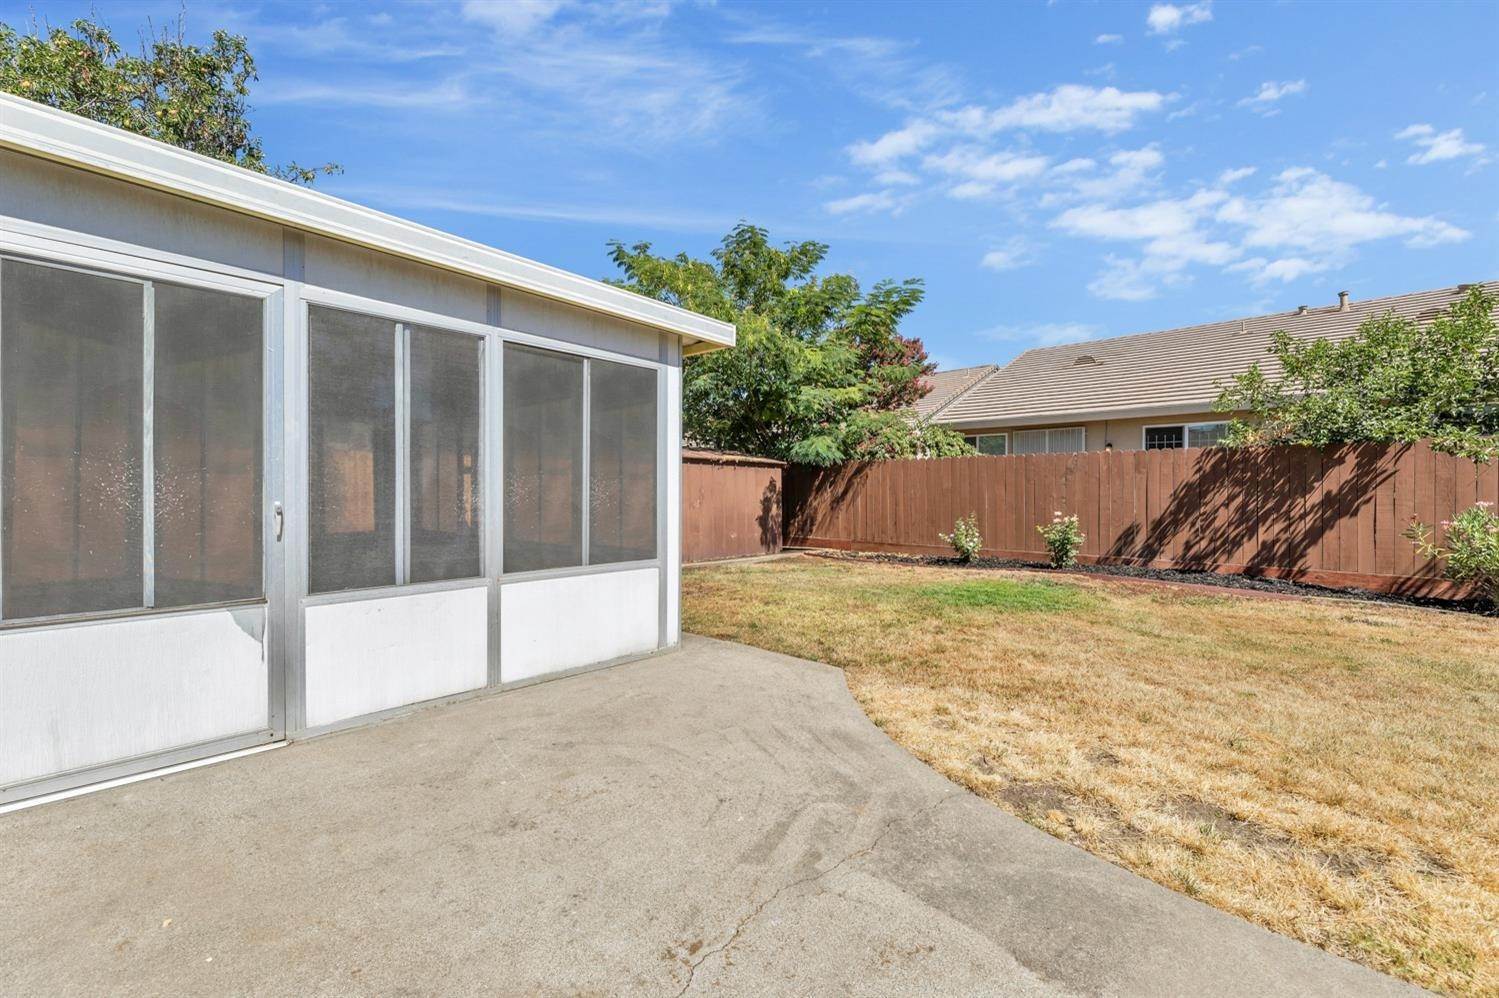 43. Single Family Homes for Active at 3241 Trentwood Way Sacramento, California 95822 United States